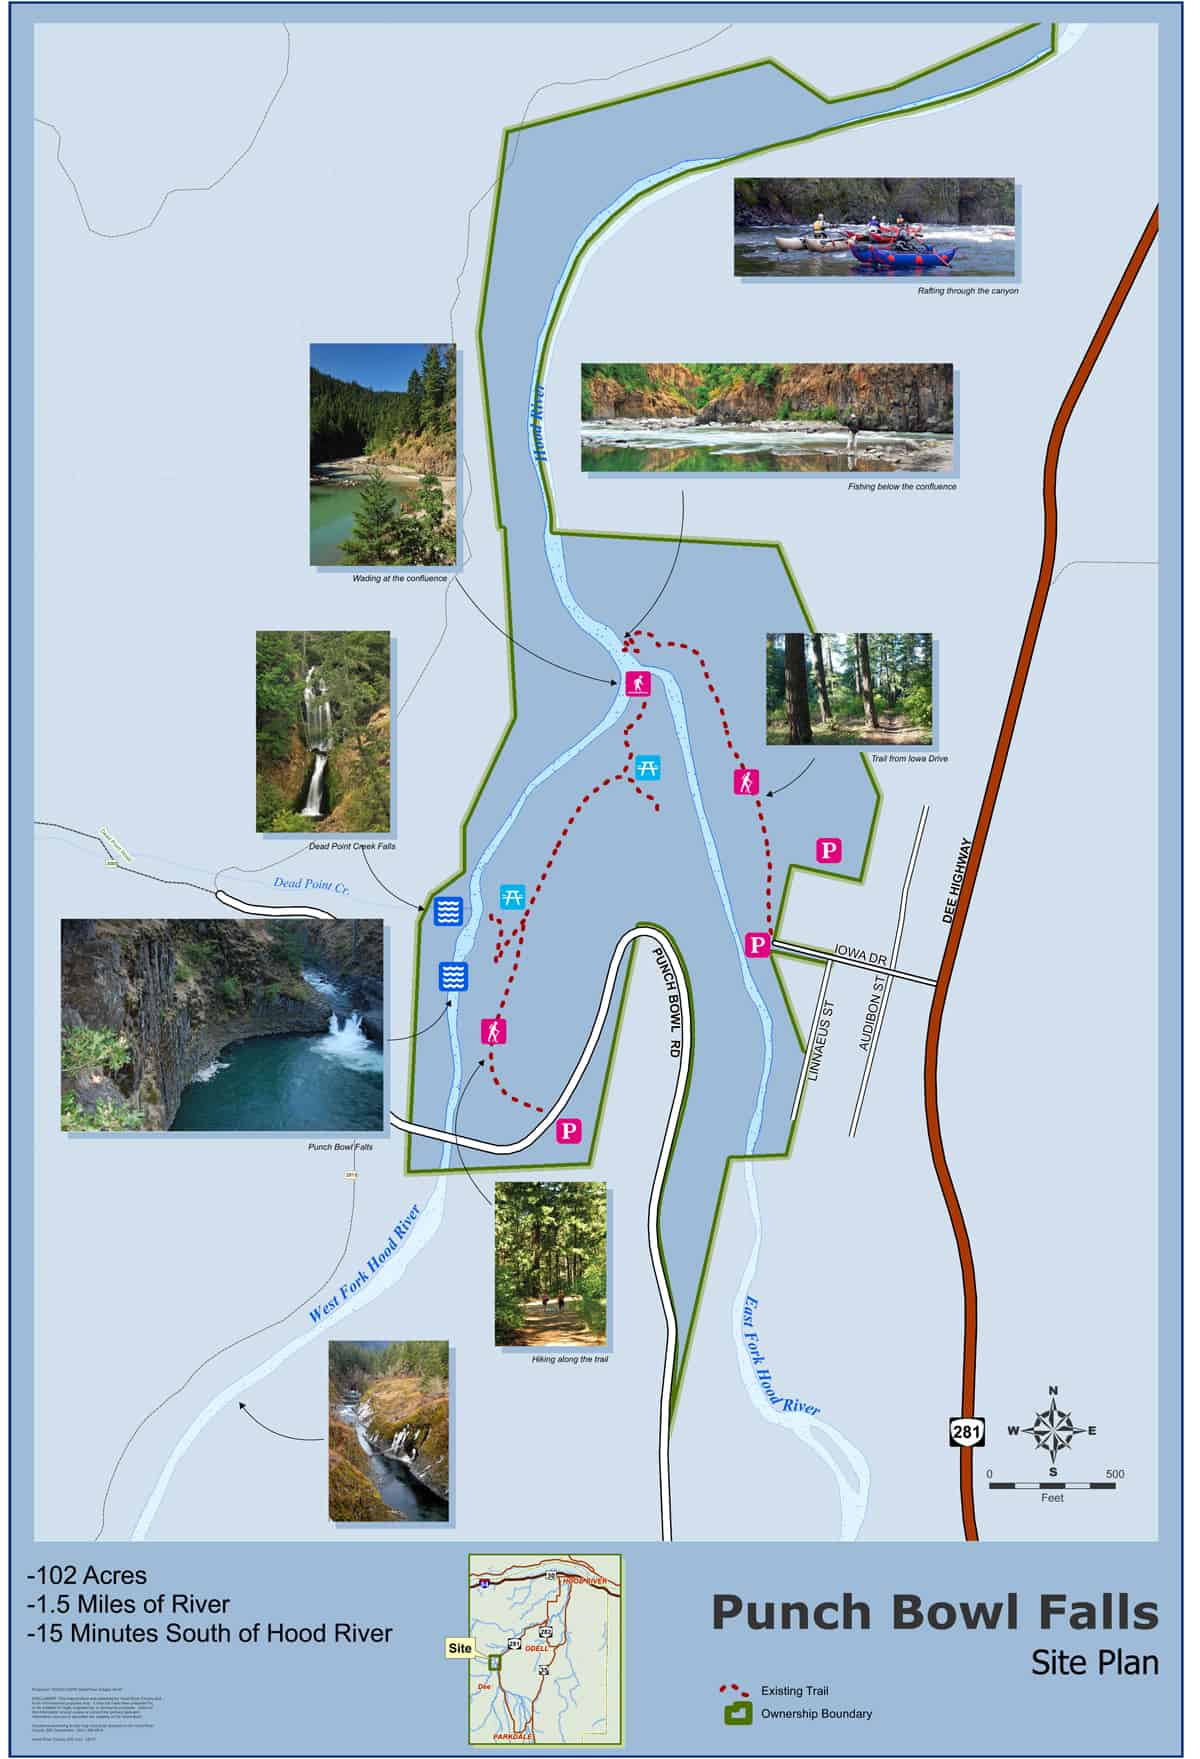 Punchbowl Falls County Park Site Plan